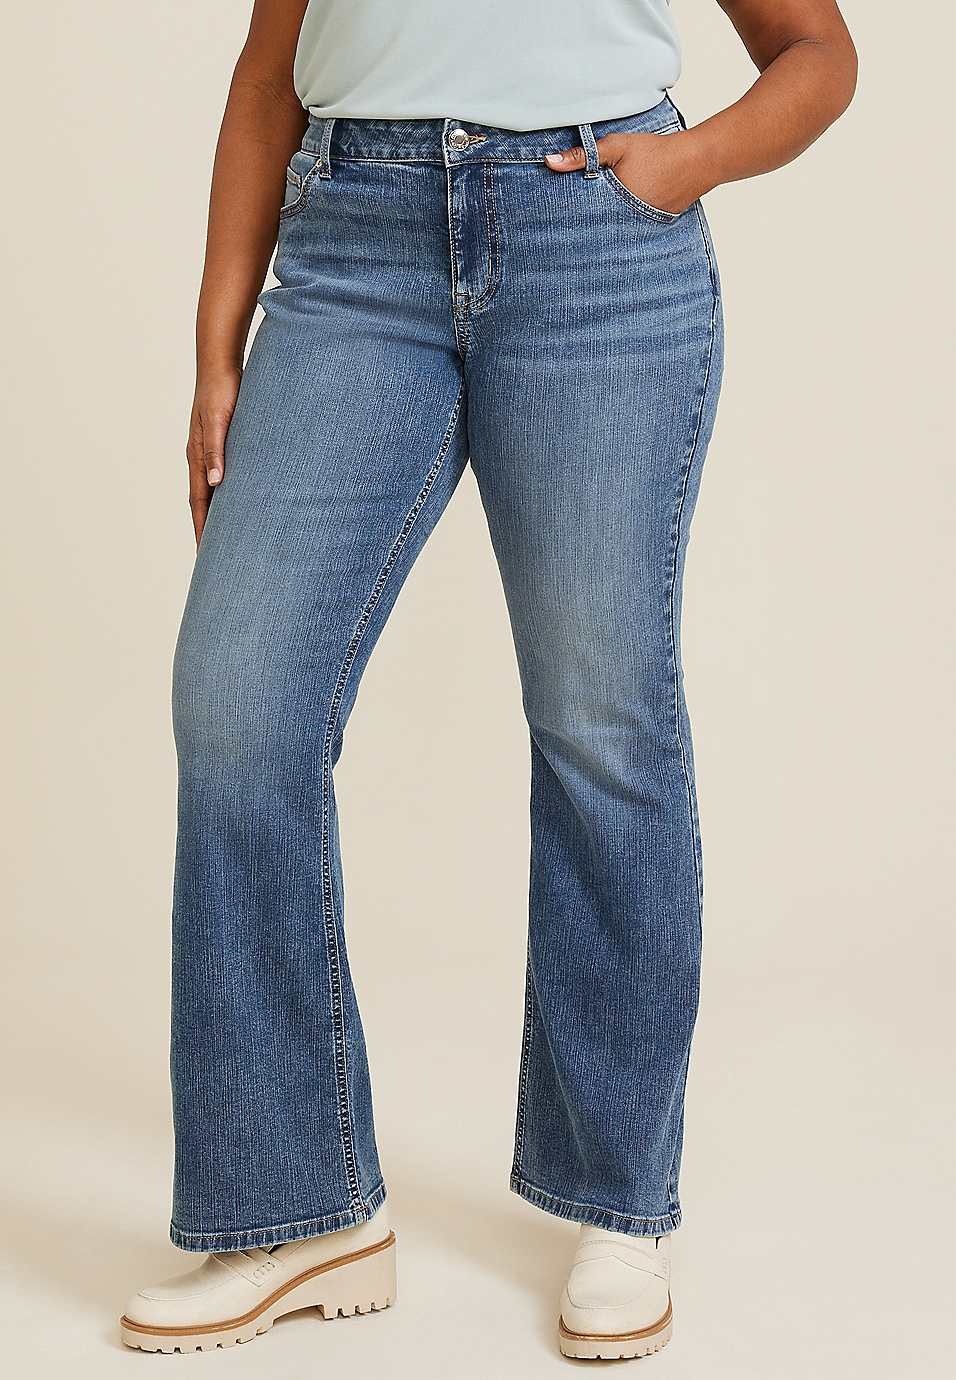 Plus Size Jeans for Women, Everyday Low Prices